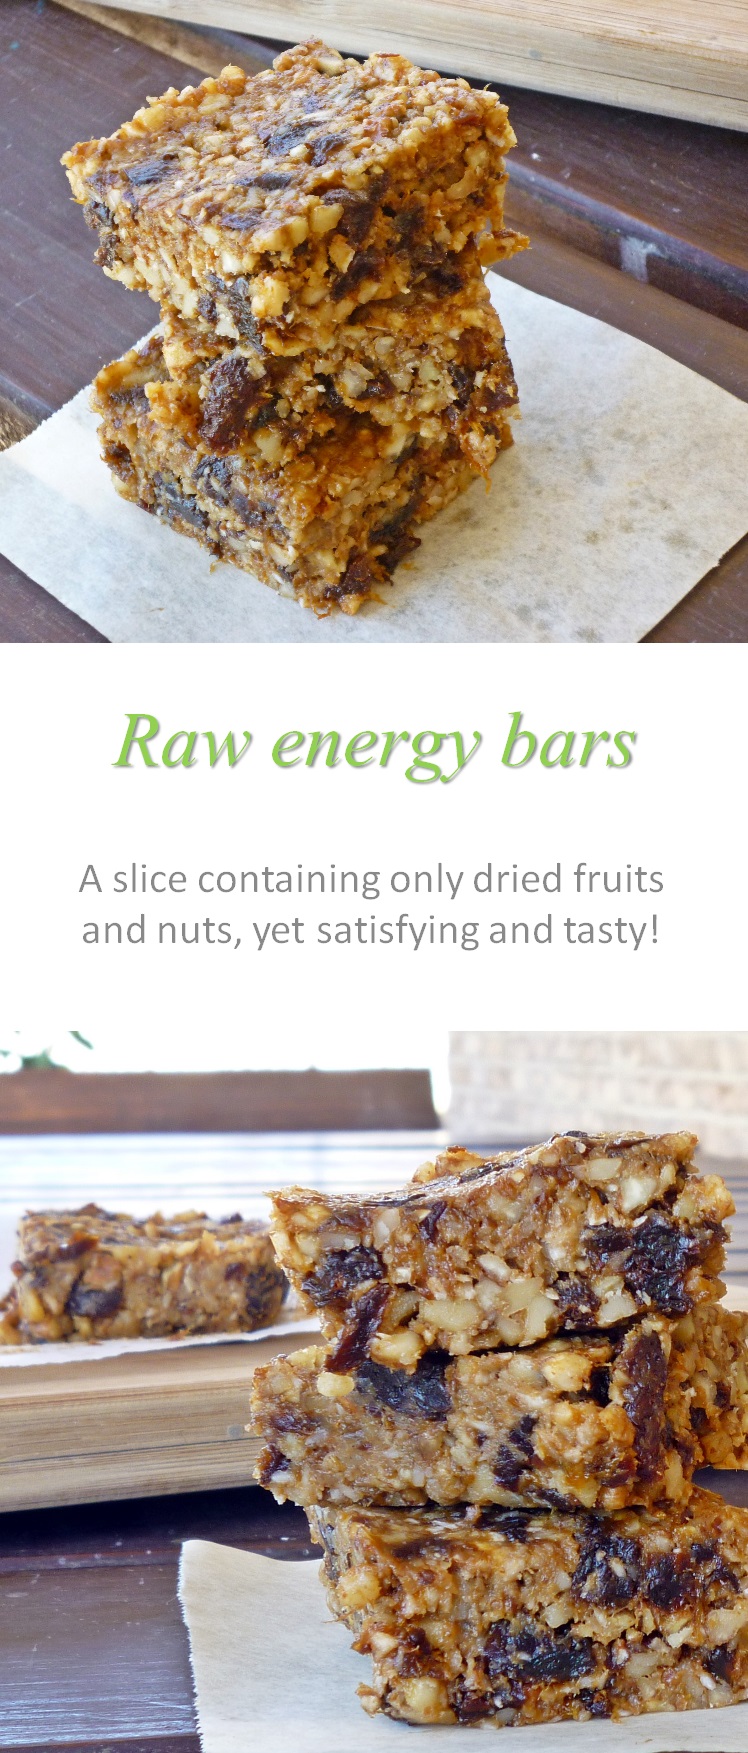 Raw energy bar - Cook at Home - Cook at Home